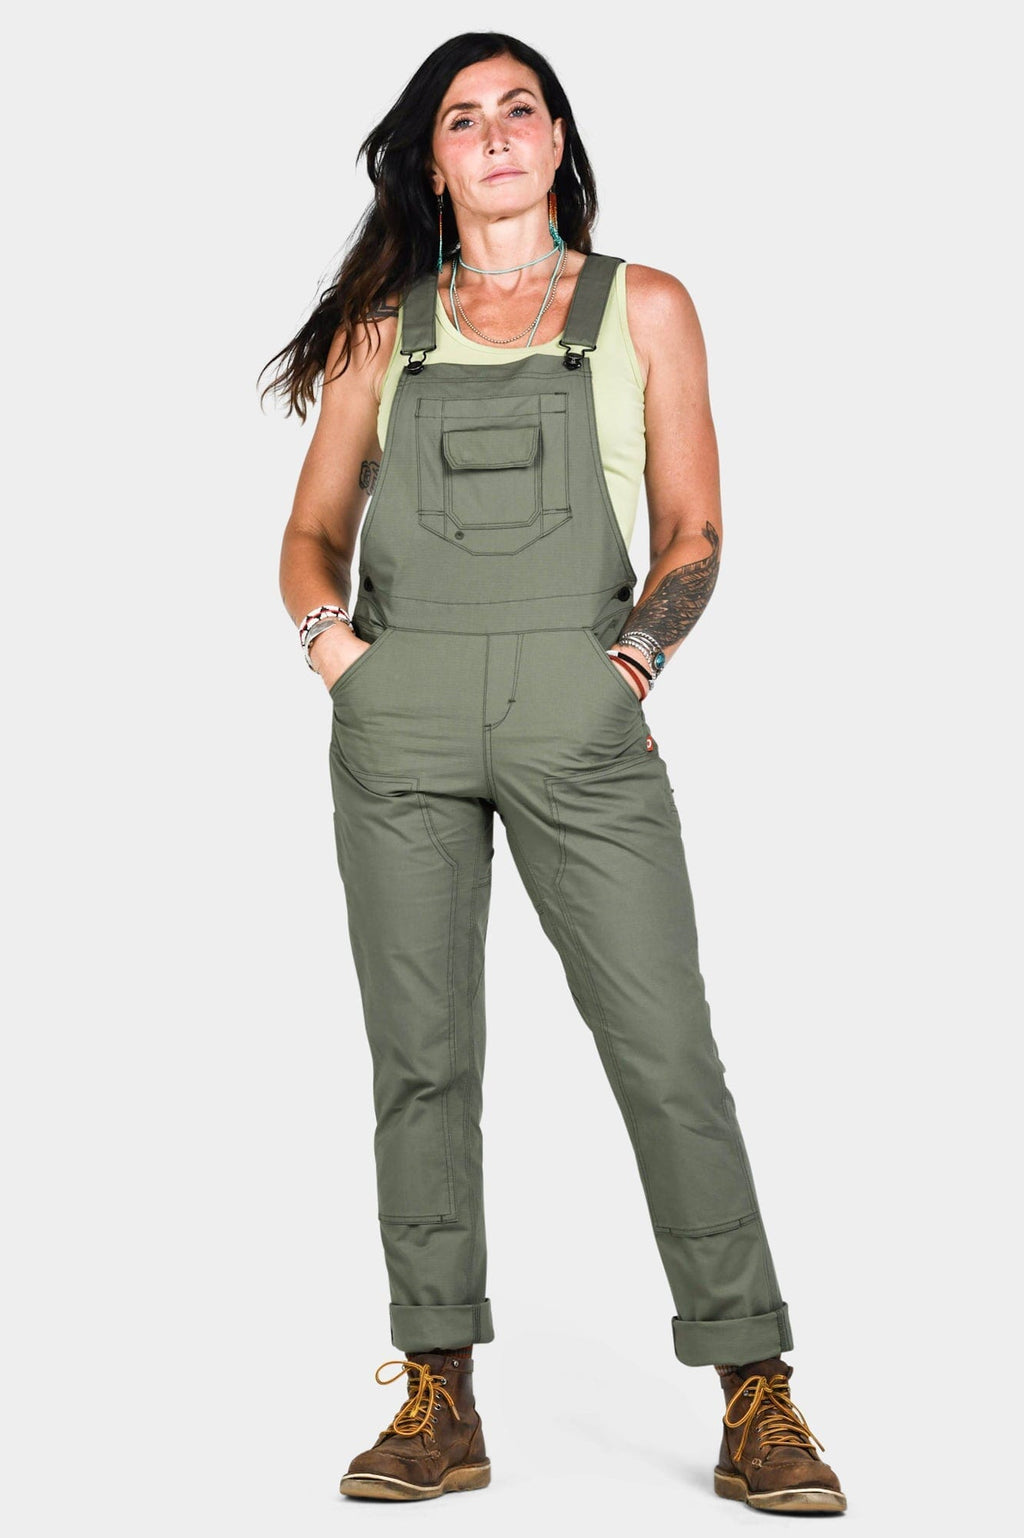 Freshley Overalls in Ultra Light Lichen Green Ripstop Work Pants Dovetail Workwear